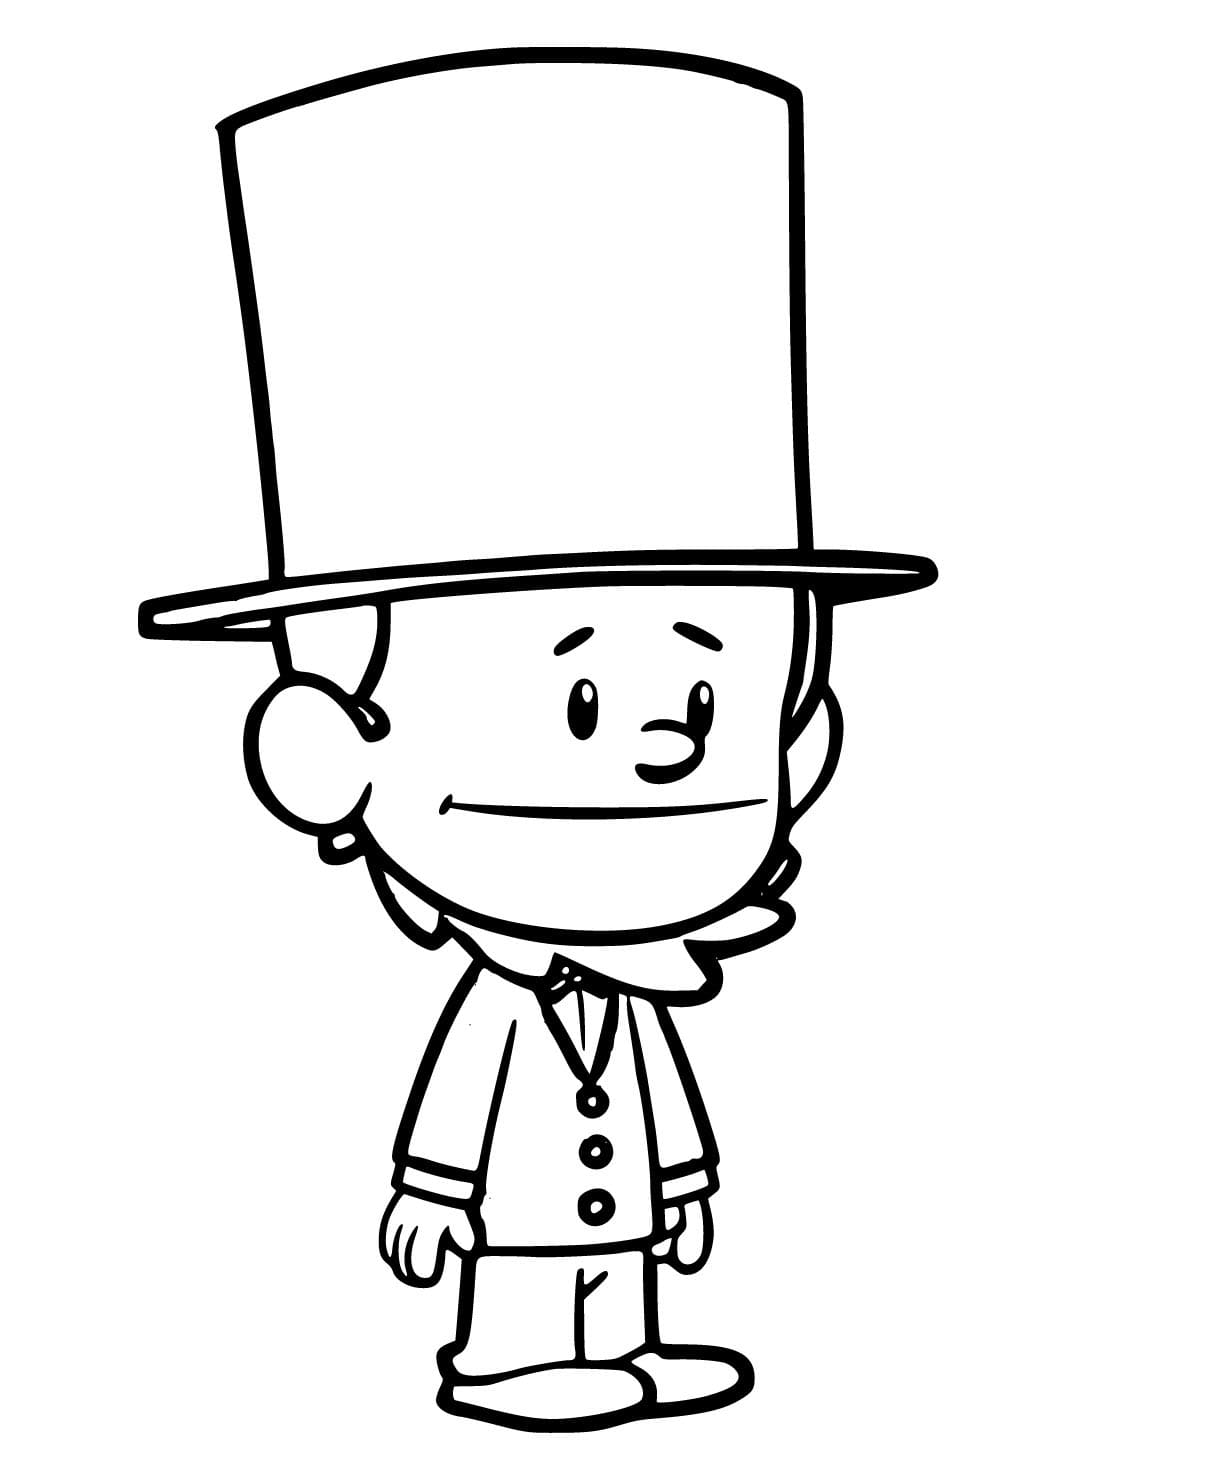 free coloring pages of abraham lincoln